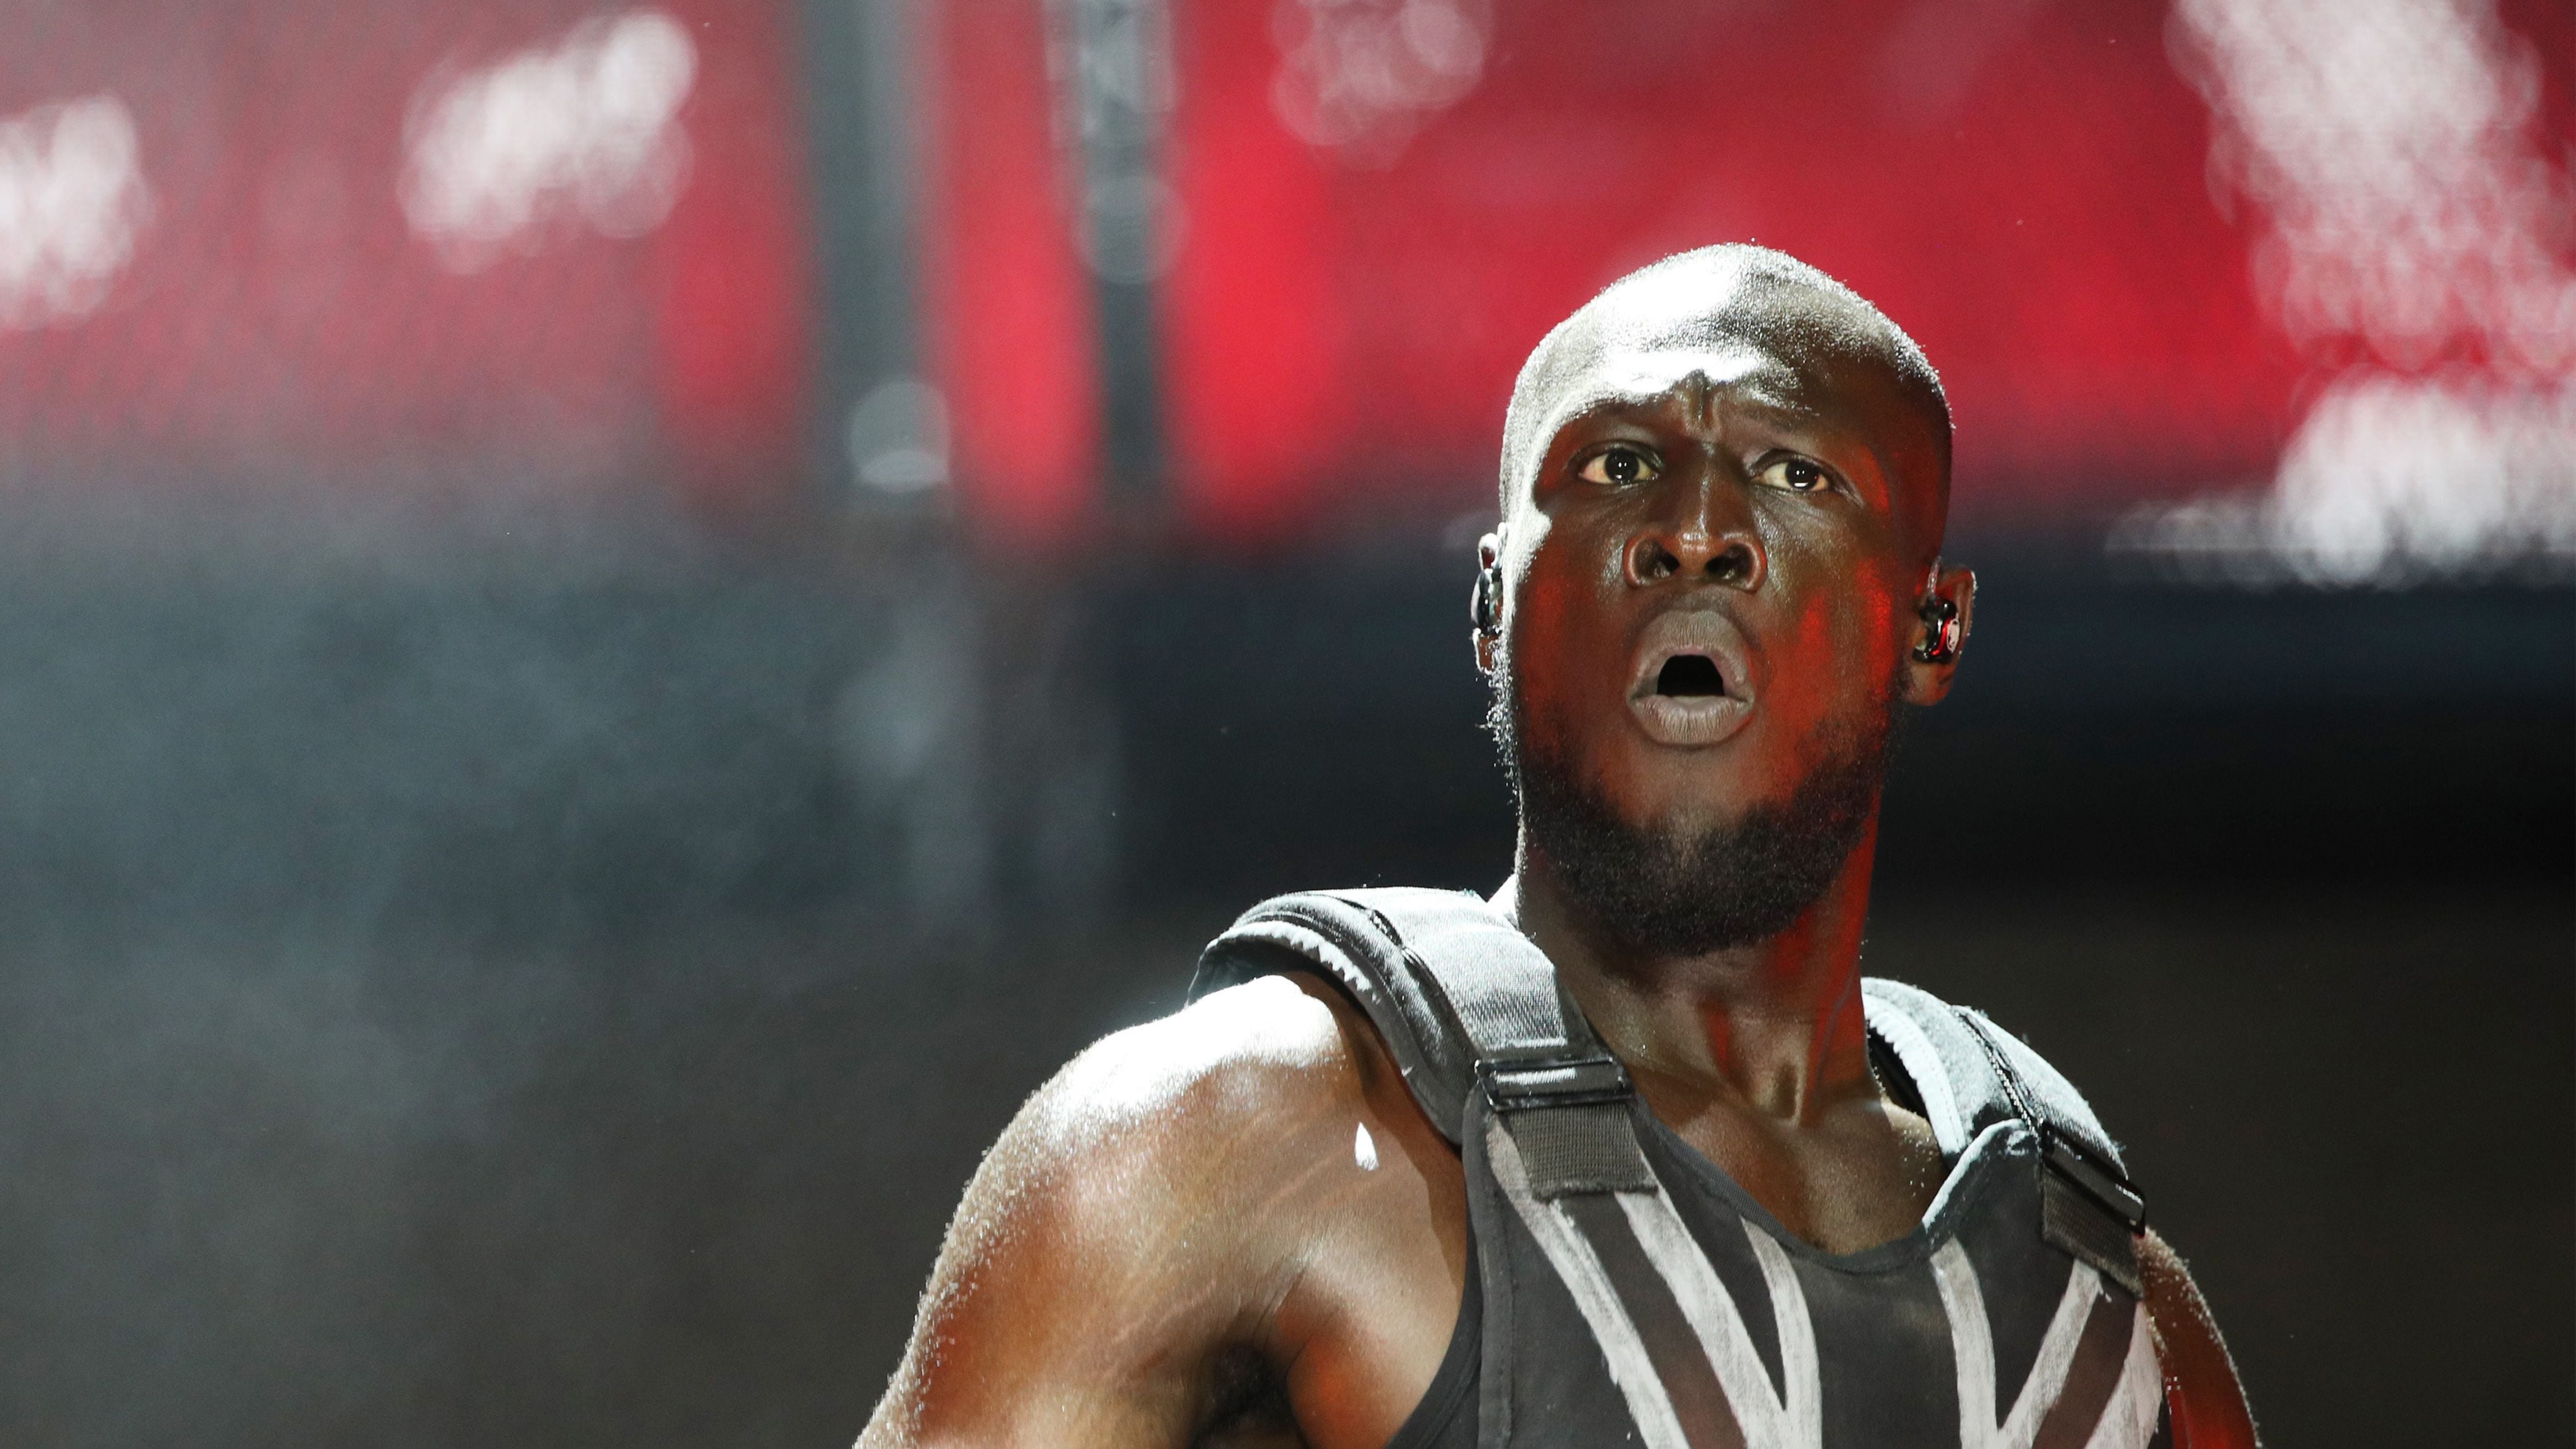 The travel alert said there was the ‘potential for violence’ at the Longitude Festival, which this year will feature stars such as Stormzy.